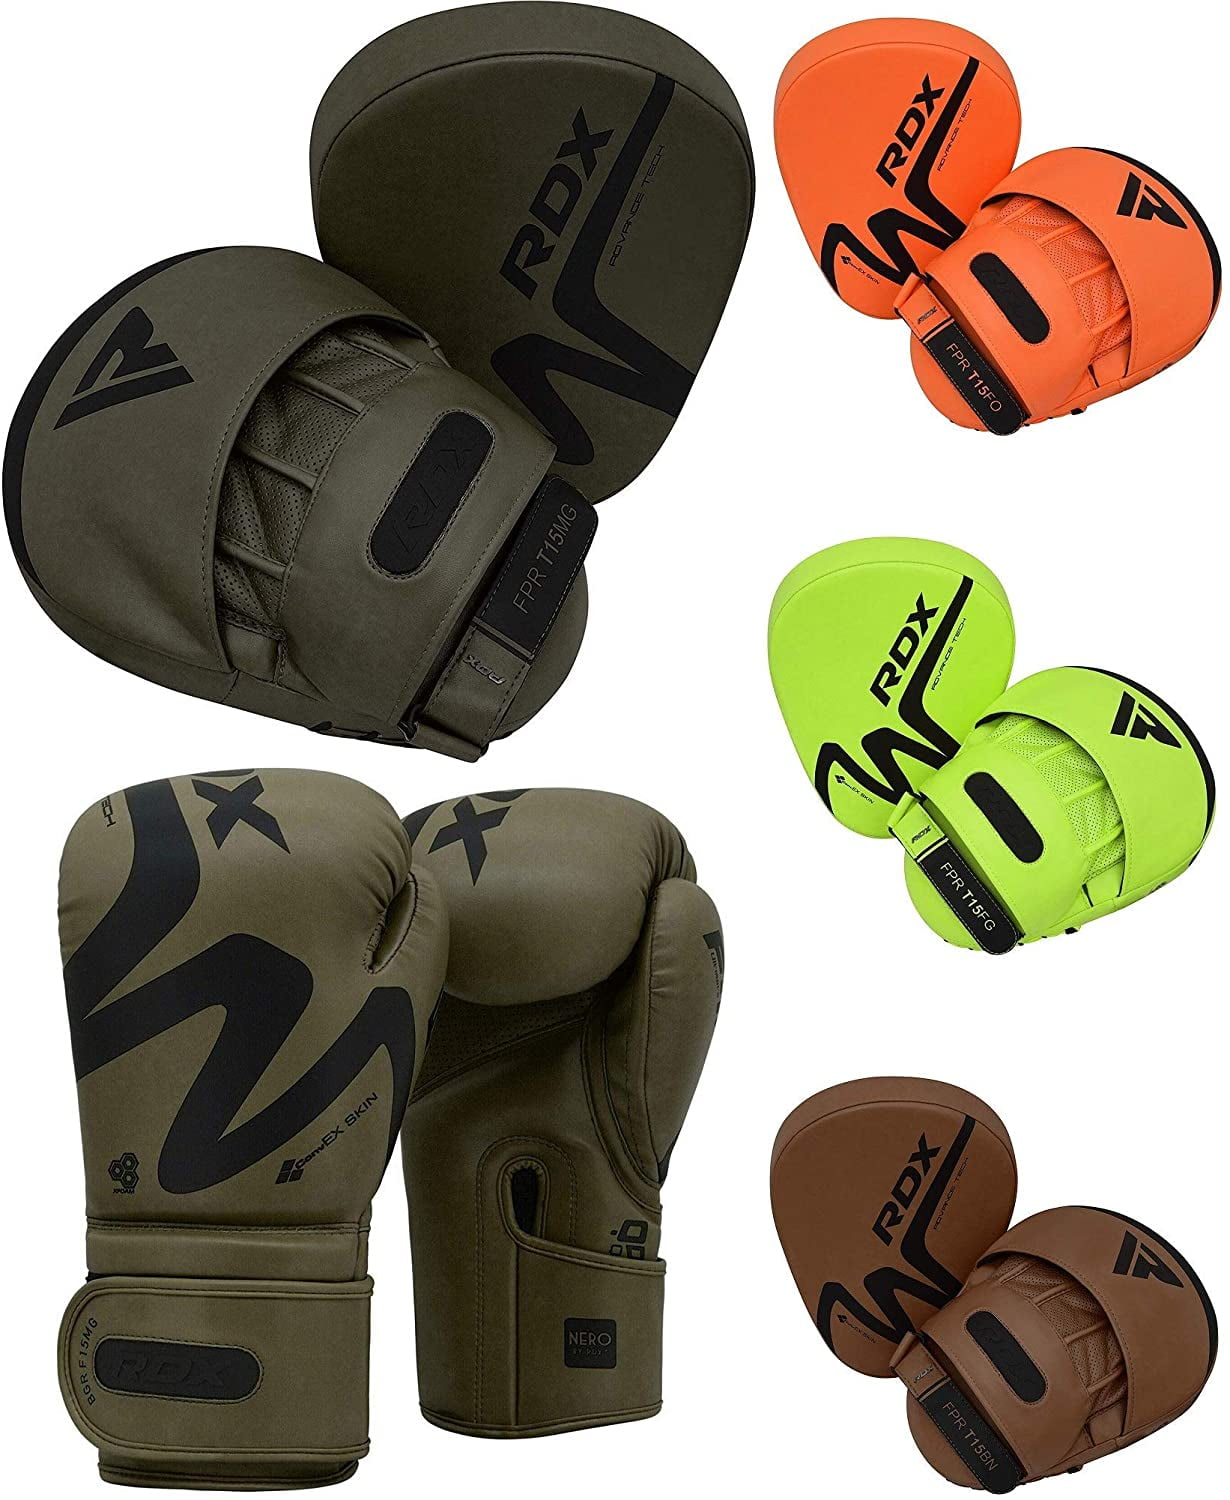 Boxing Bag Gloves with MMA Focus Pads Set Hook & Jabs Mitts Punch Bag Training 